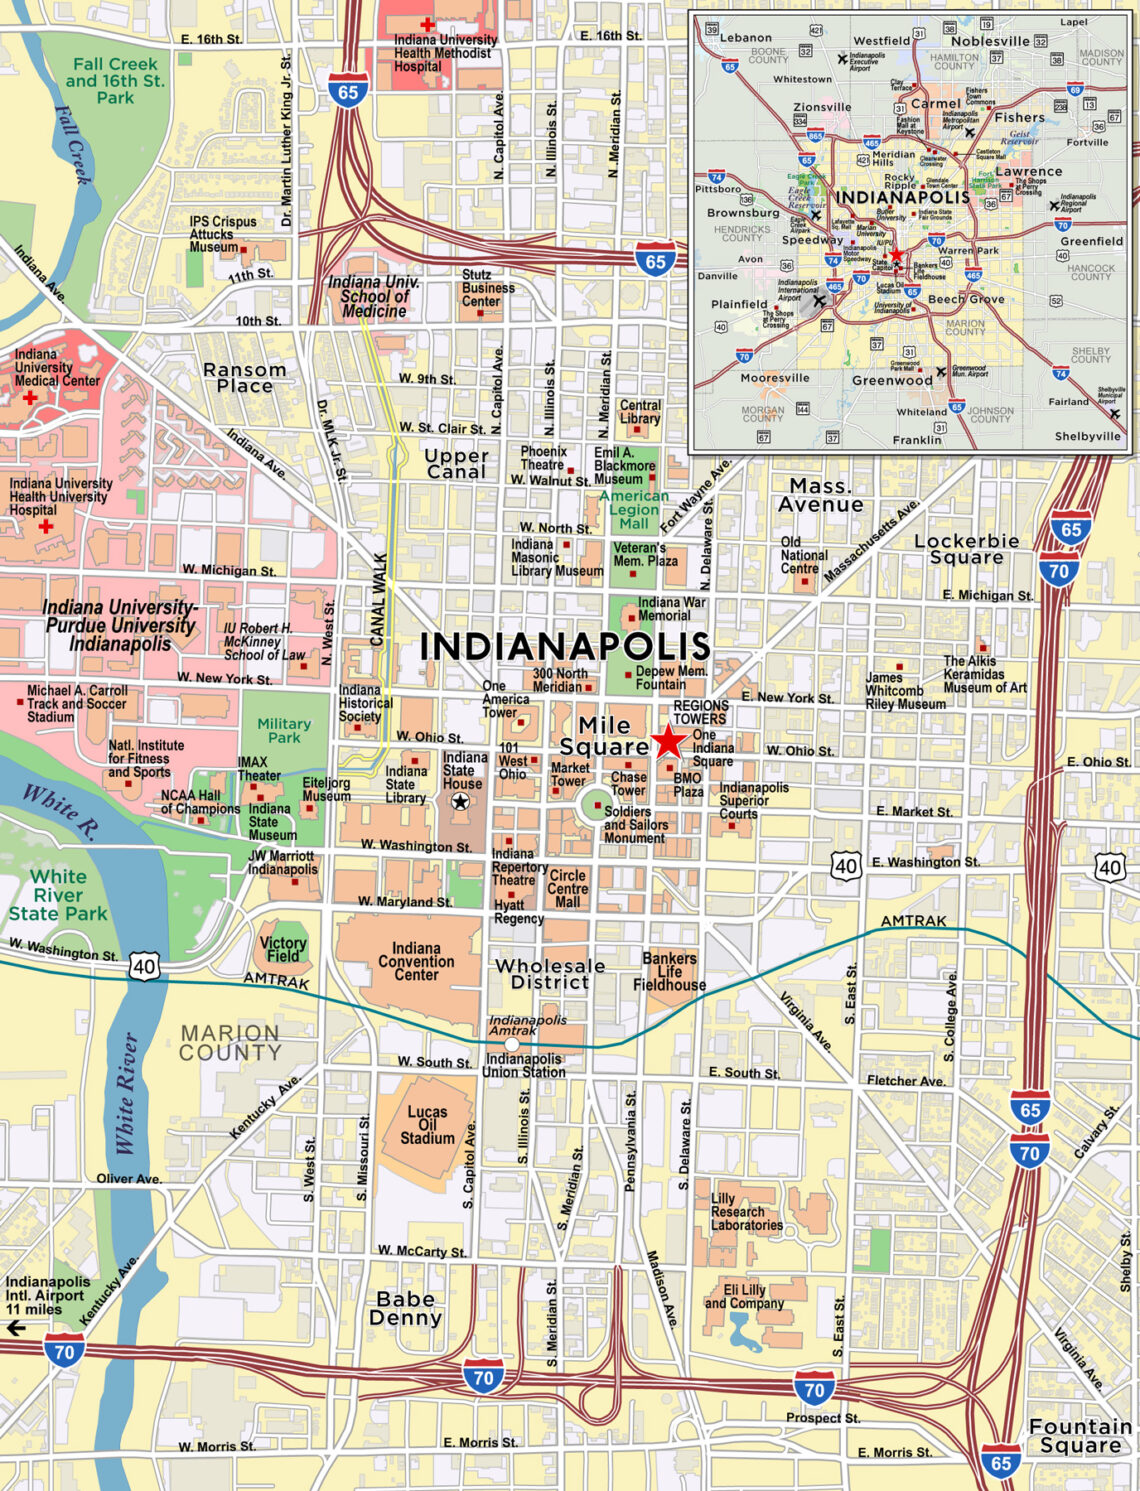 Custom Mapping & GIS Services in Indianapolis, IN - Red Paw Technologies